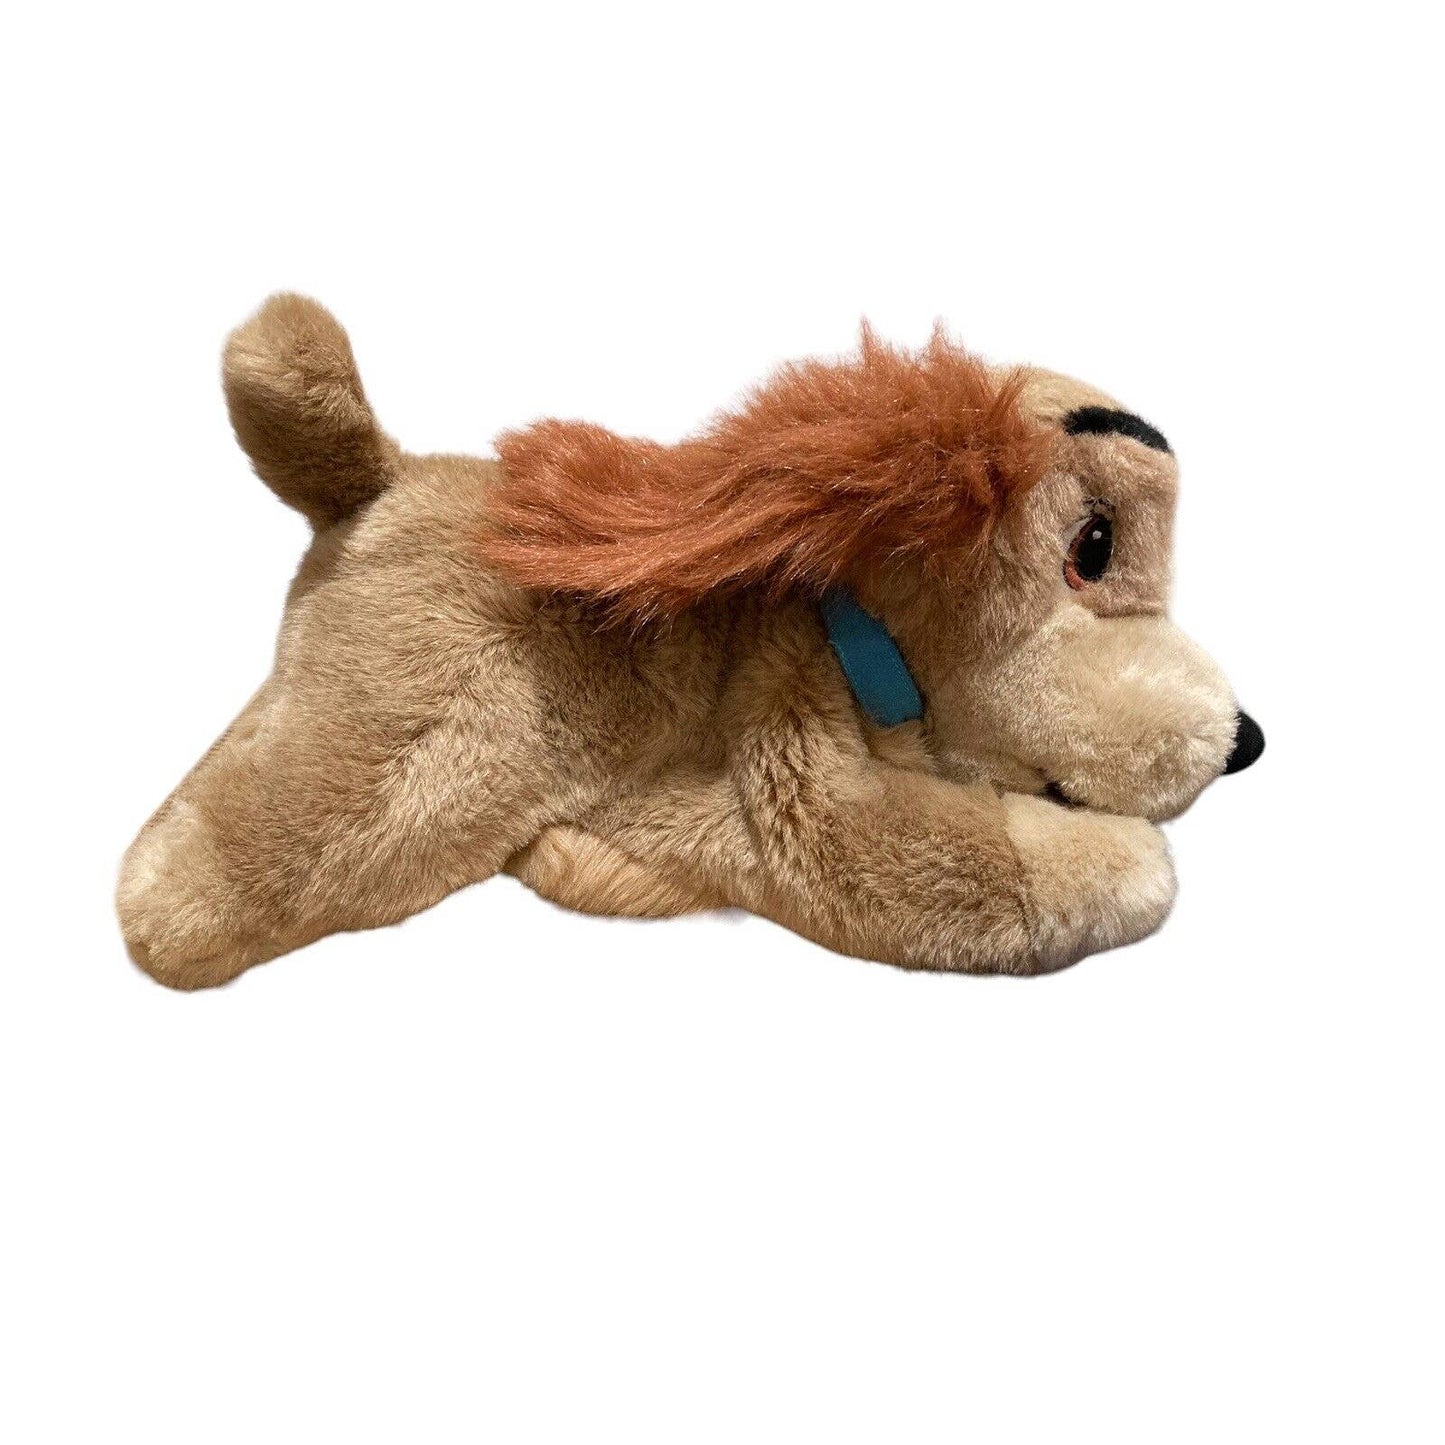 The Disney Store Vintage Lady And The Tramp 12” Bean Bag Stuffed Plush Dog Toy